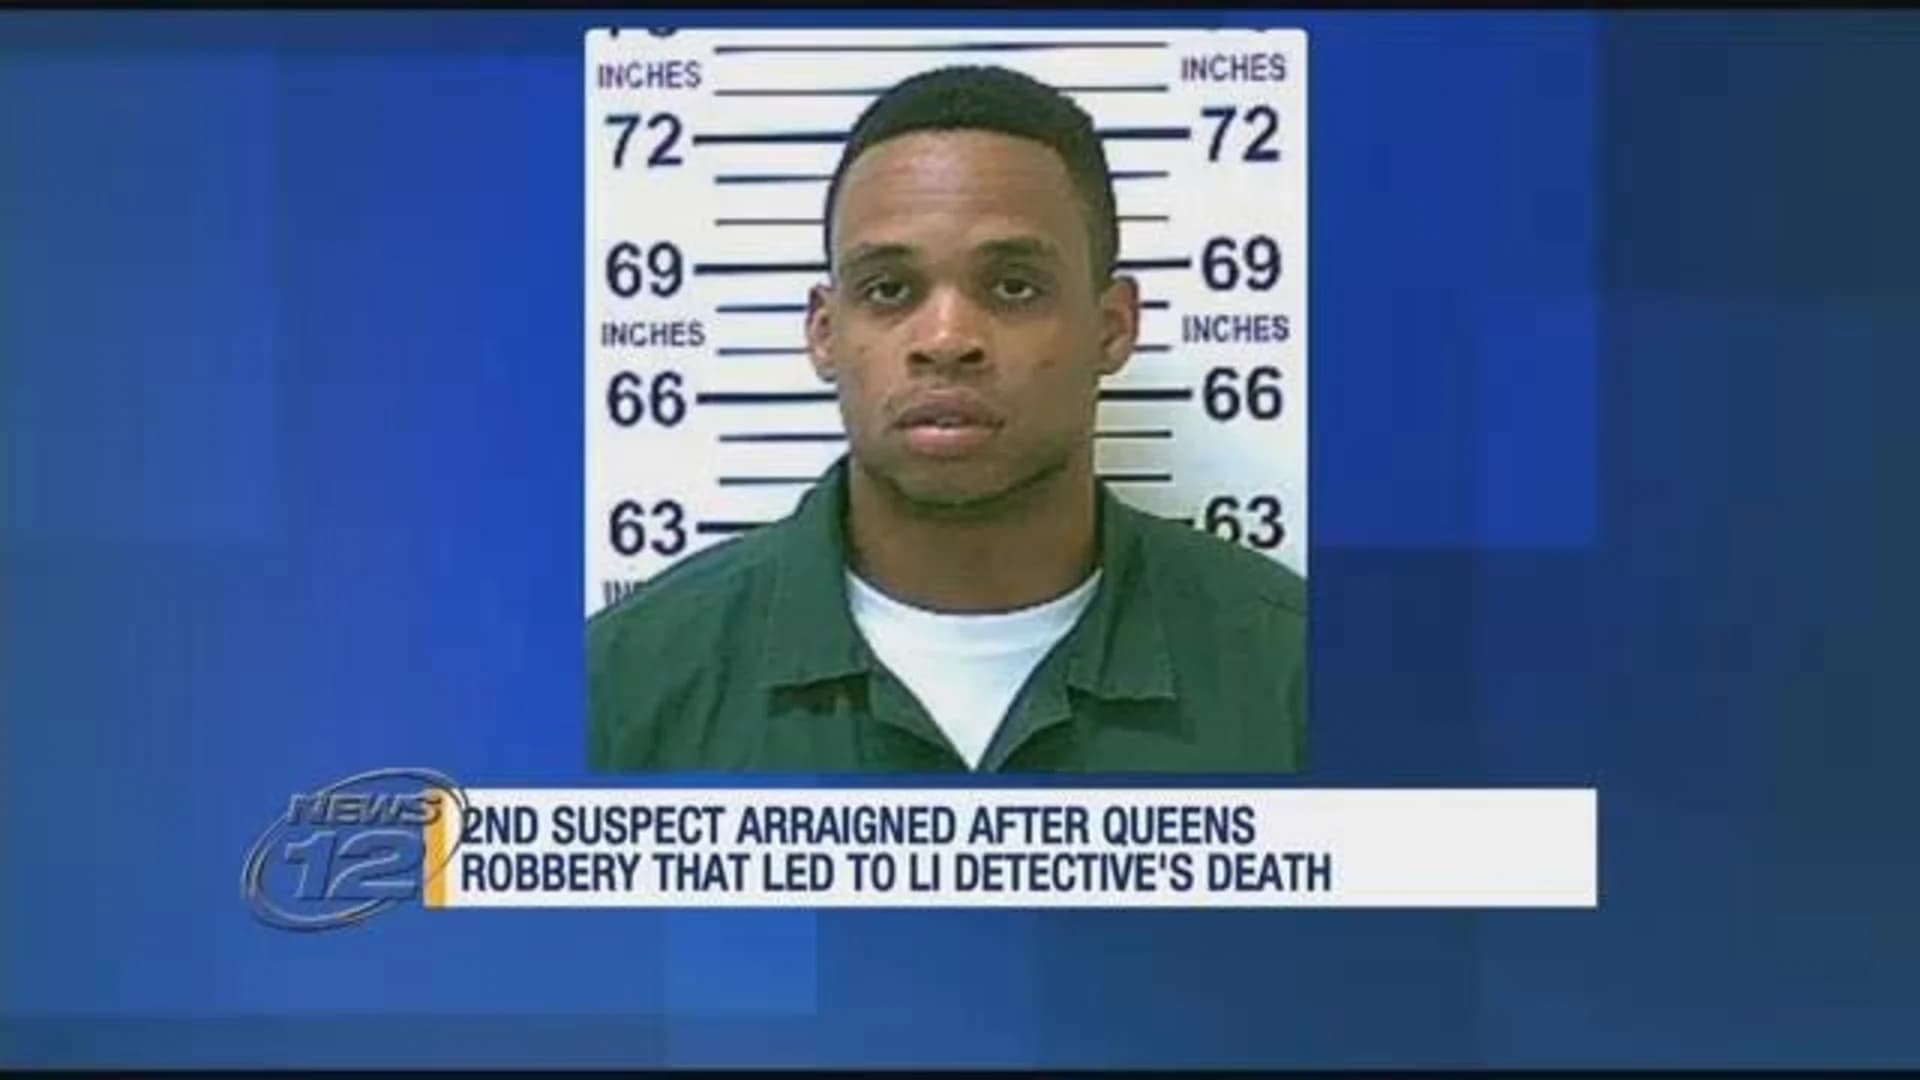 2nd suspect in robbery that led to NYPD detective's death held without bail